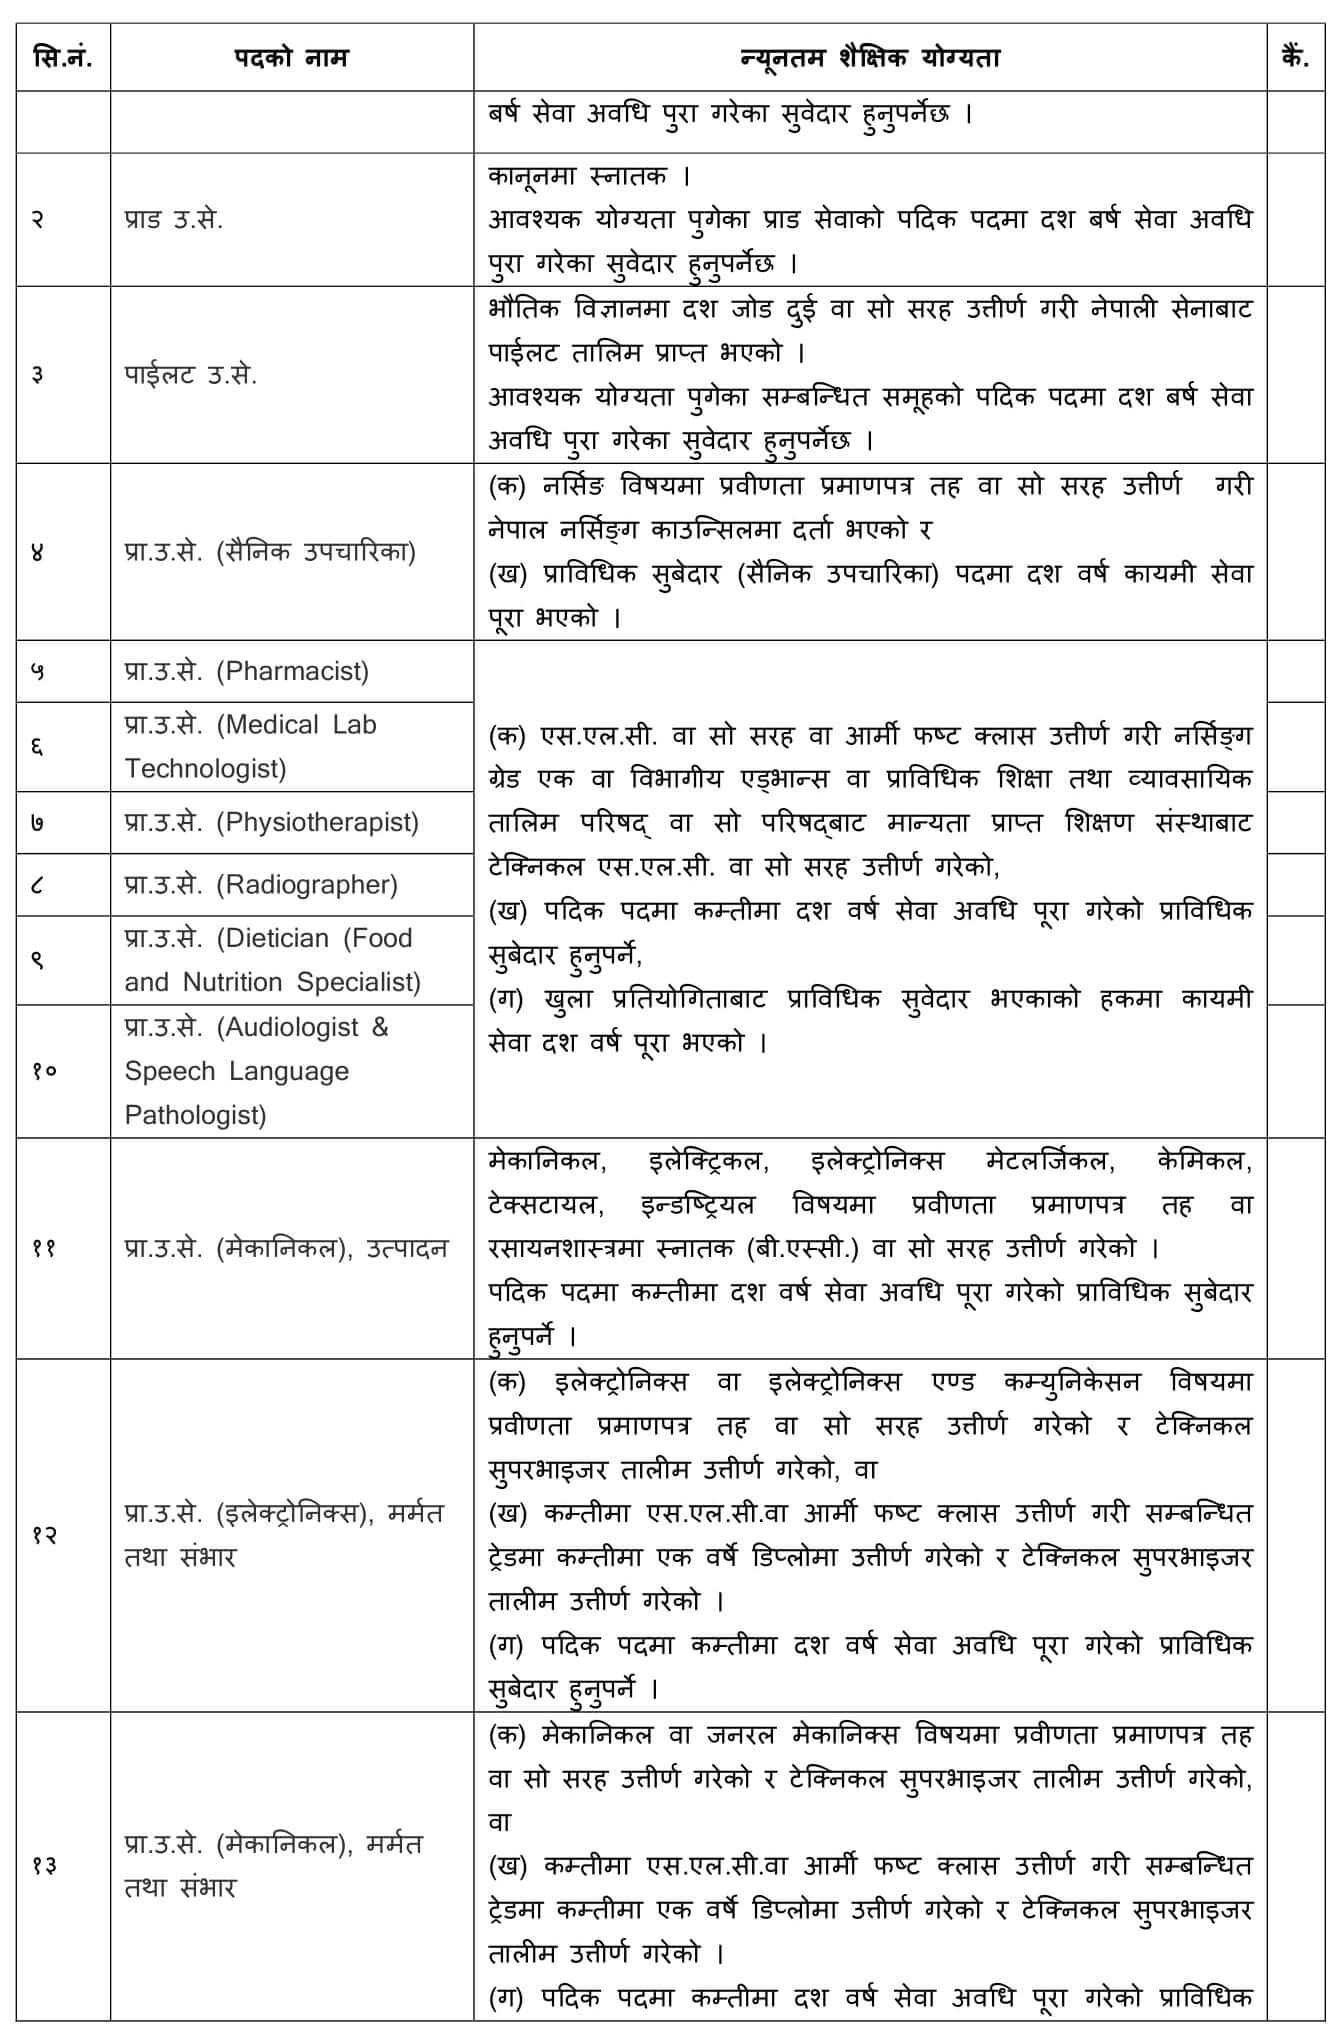 Nepal Army Vacancy for Various Technical Positions